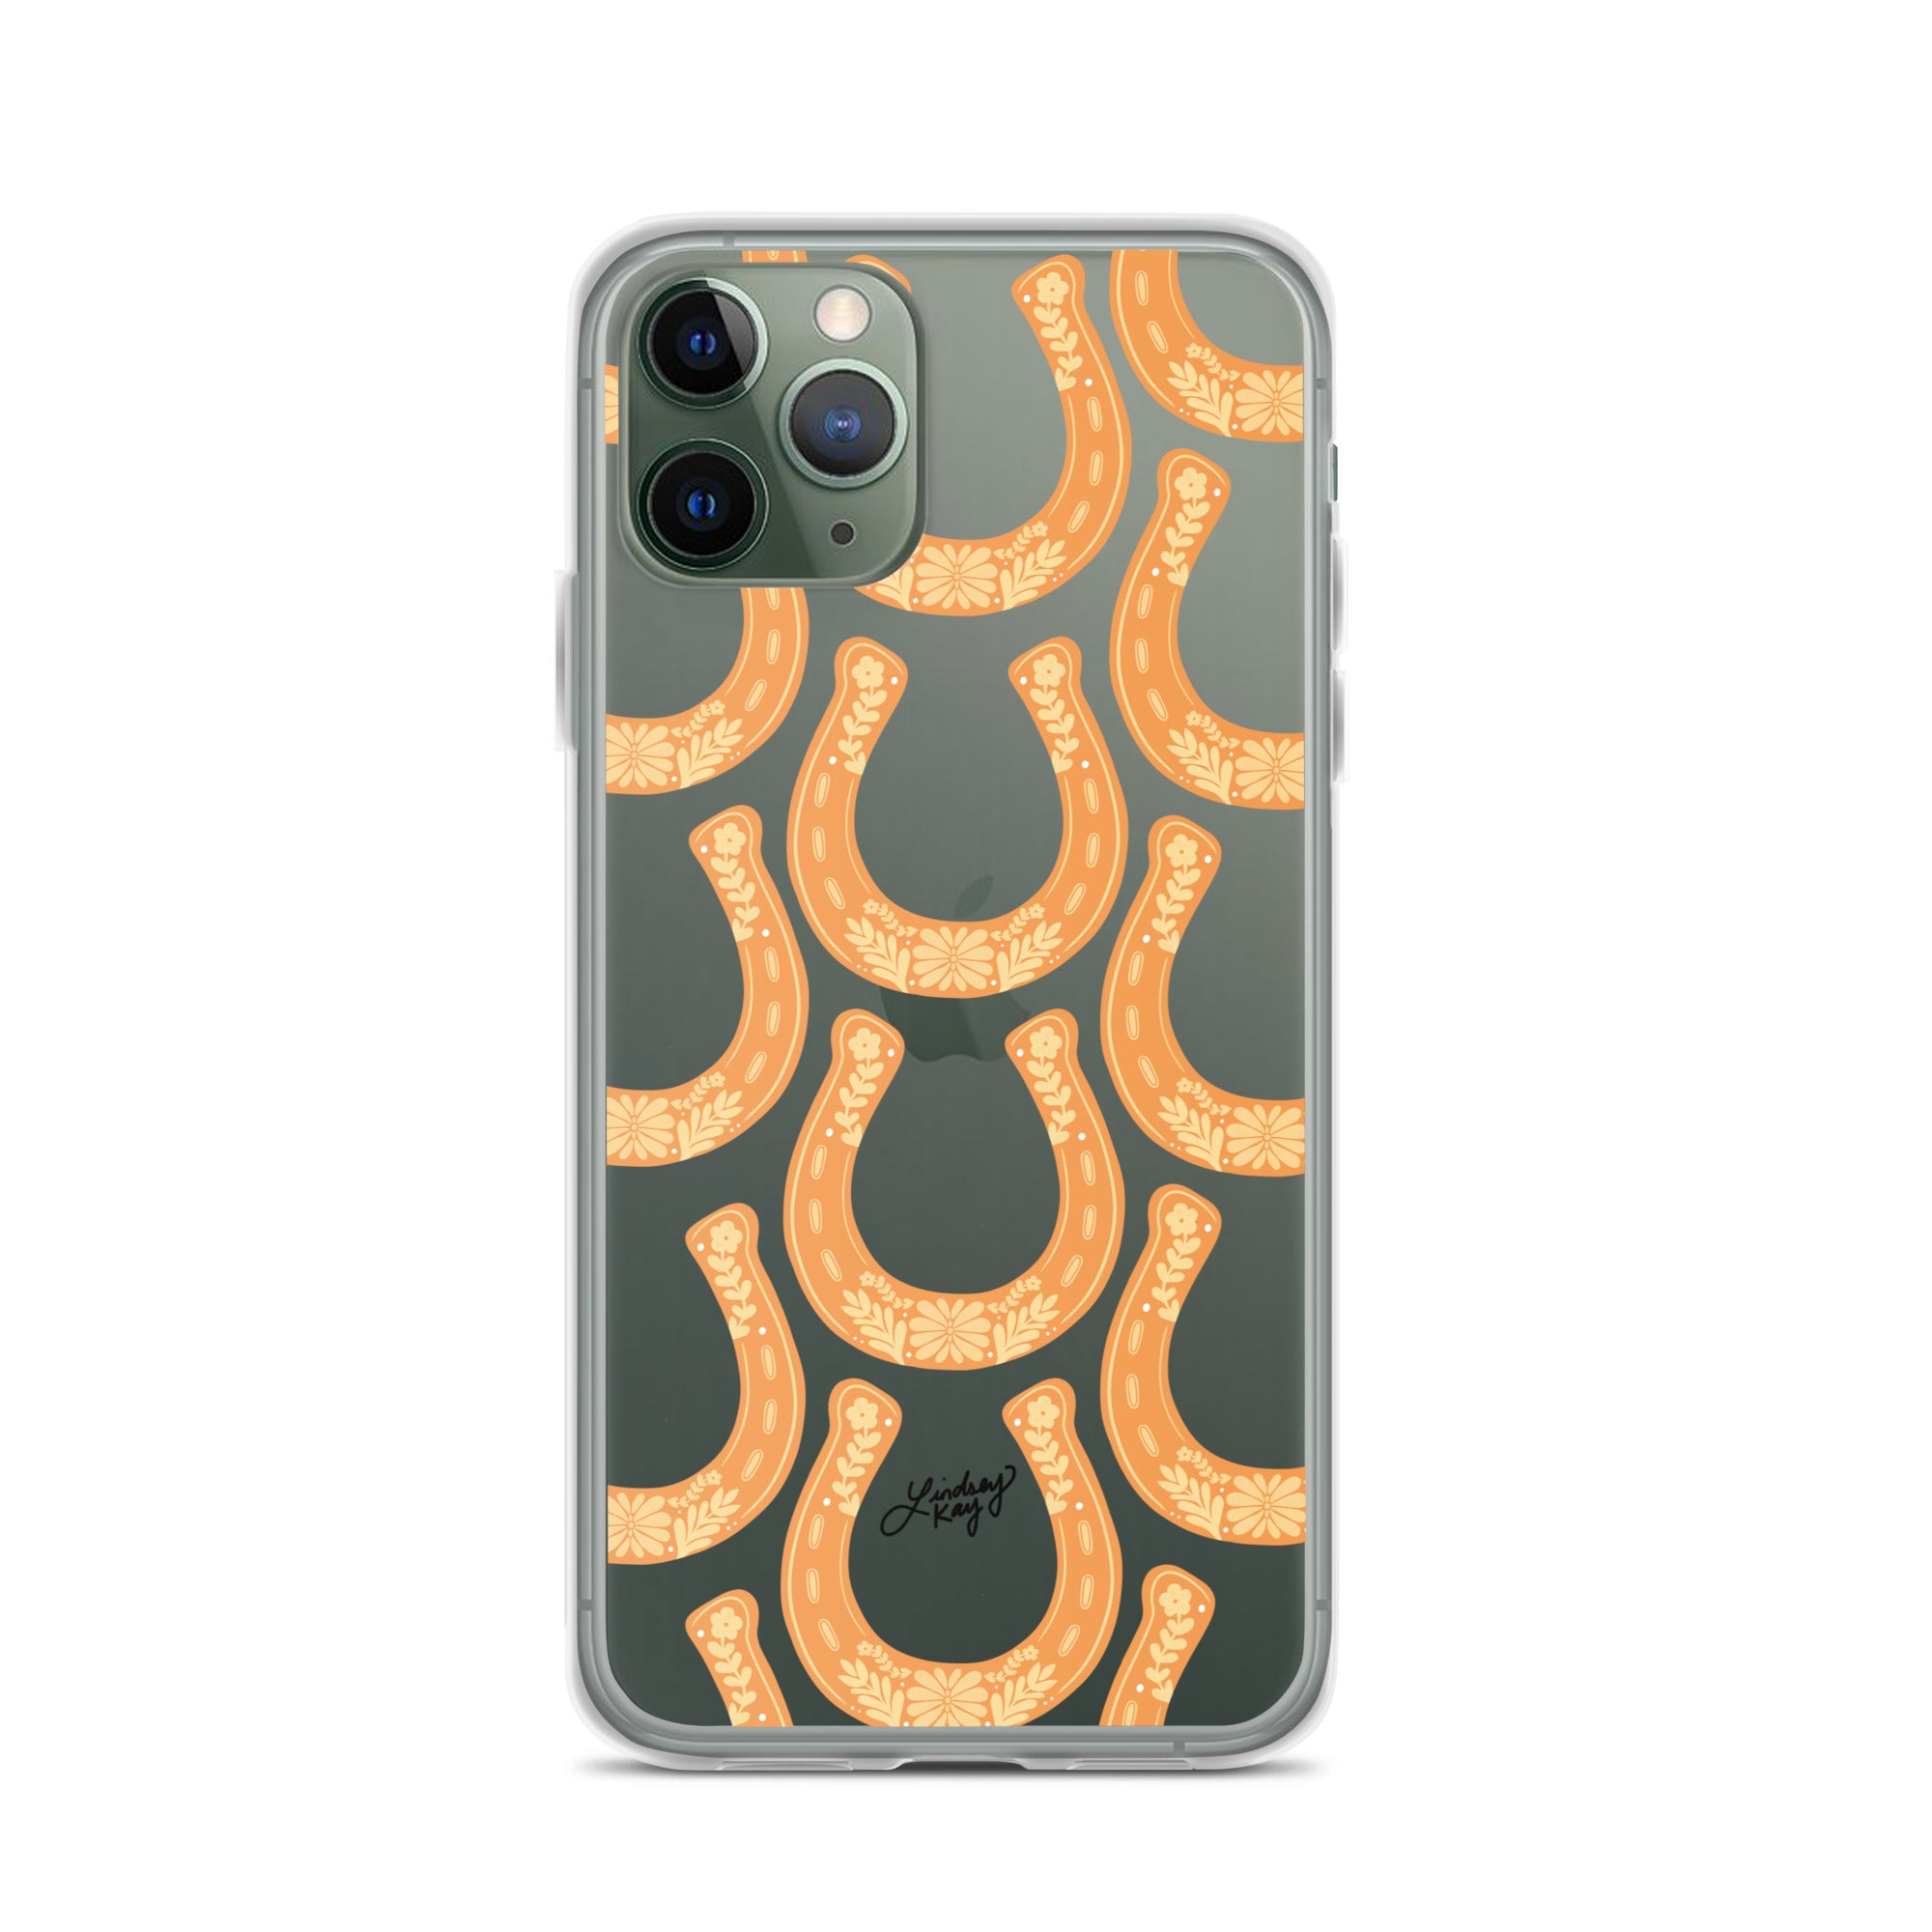 horseshoe yellow orange illustration pattern floral western cowgirl cowboy iphone iphone-15 phone case cover clear lindsey kay collective